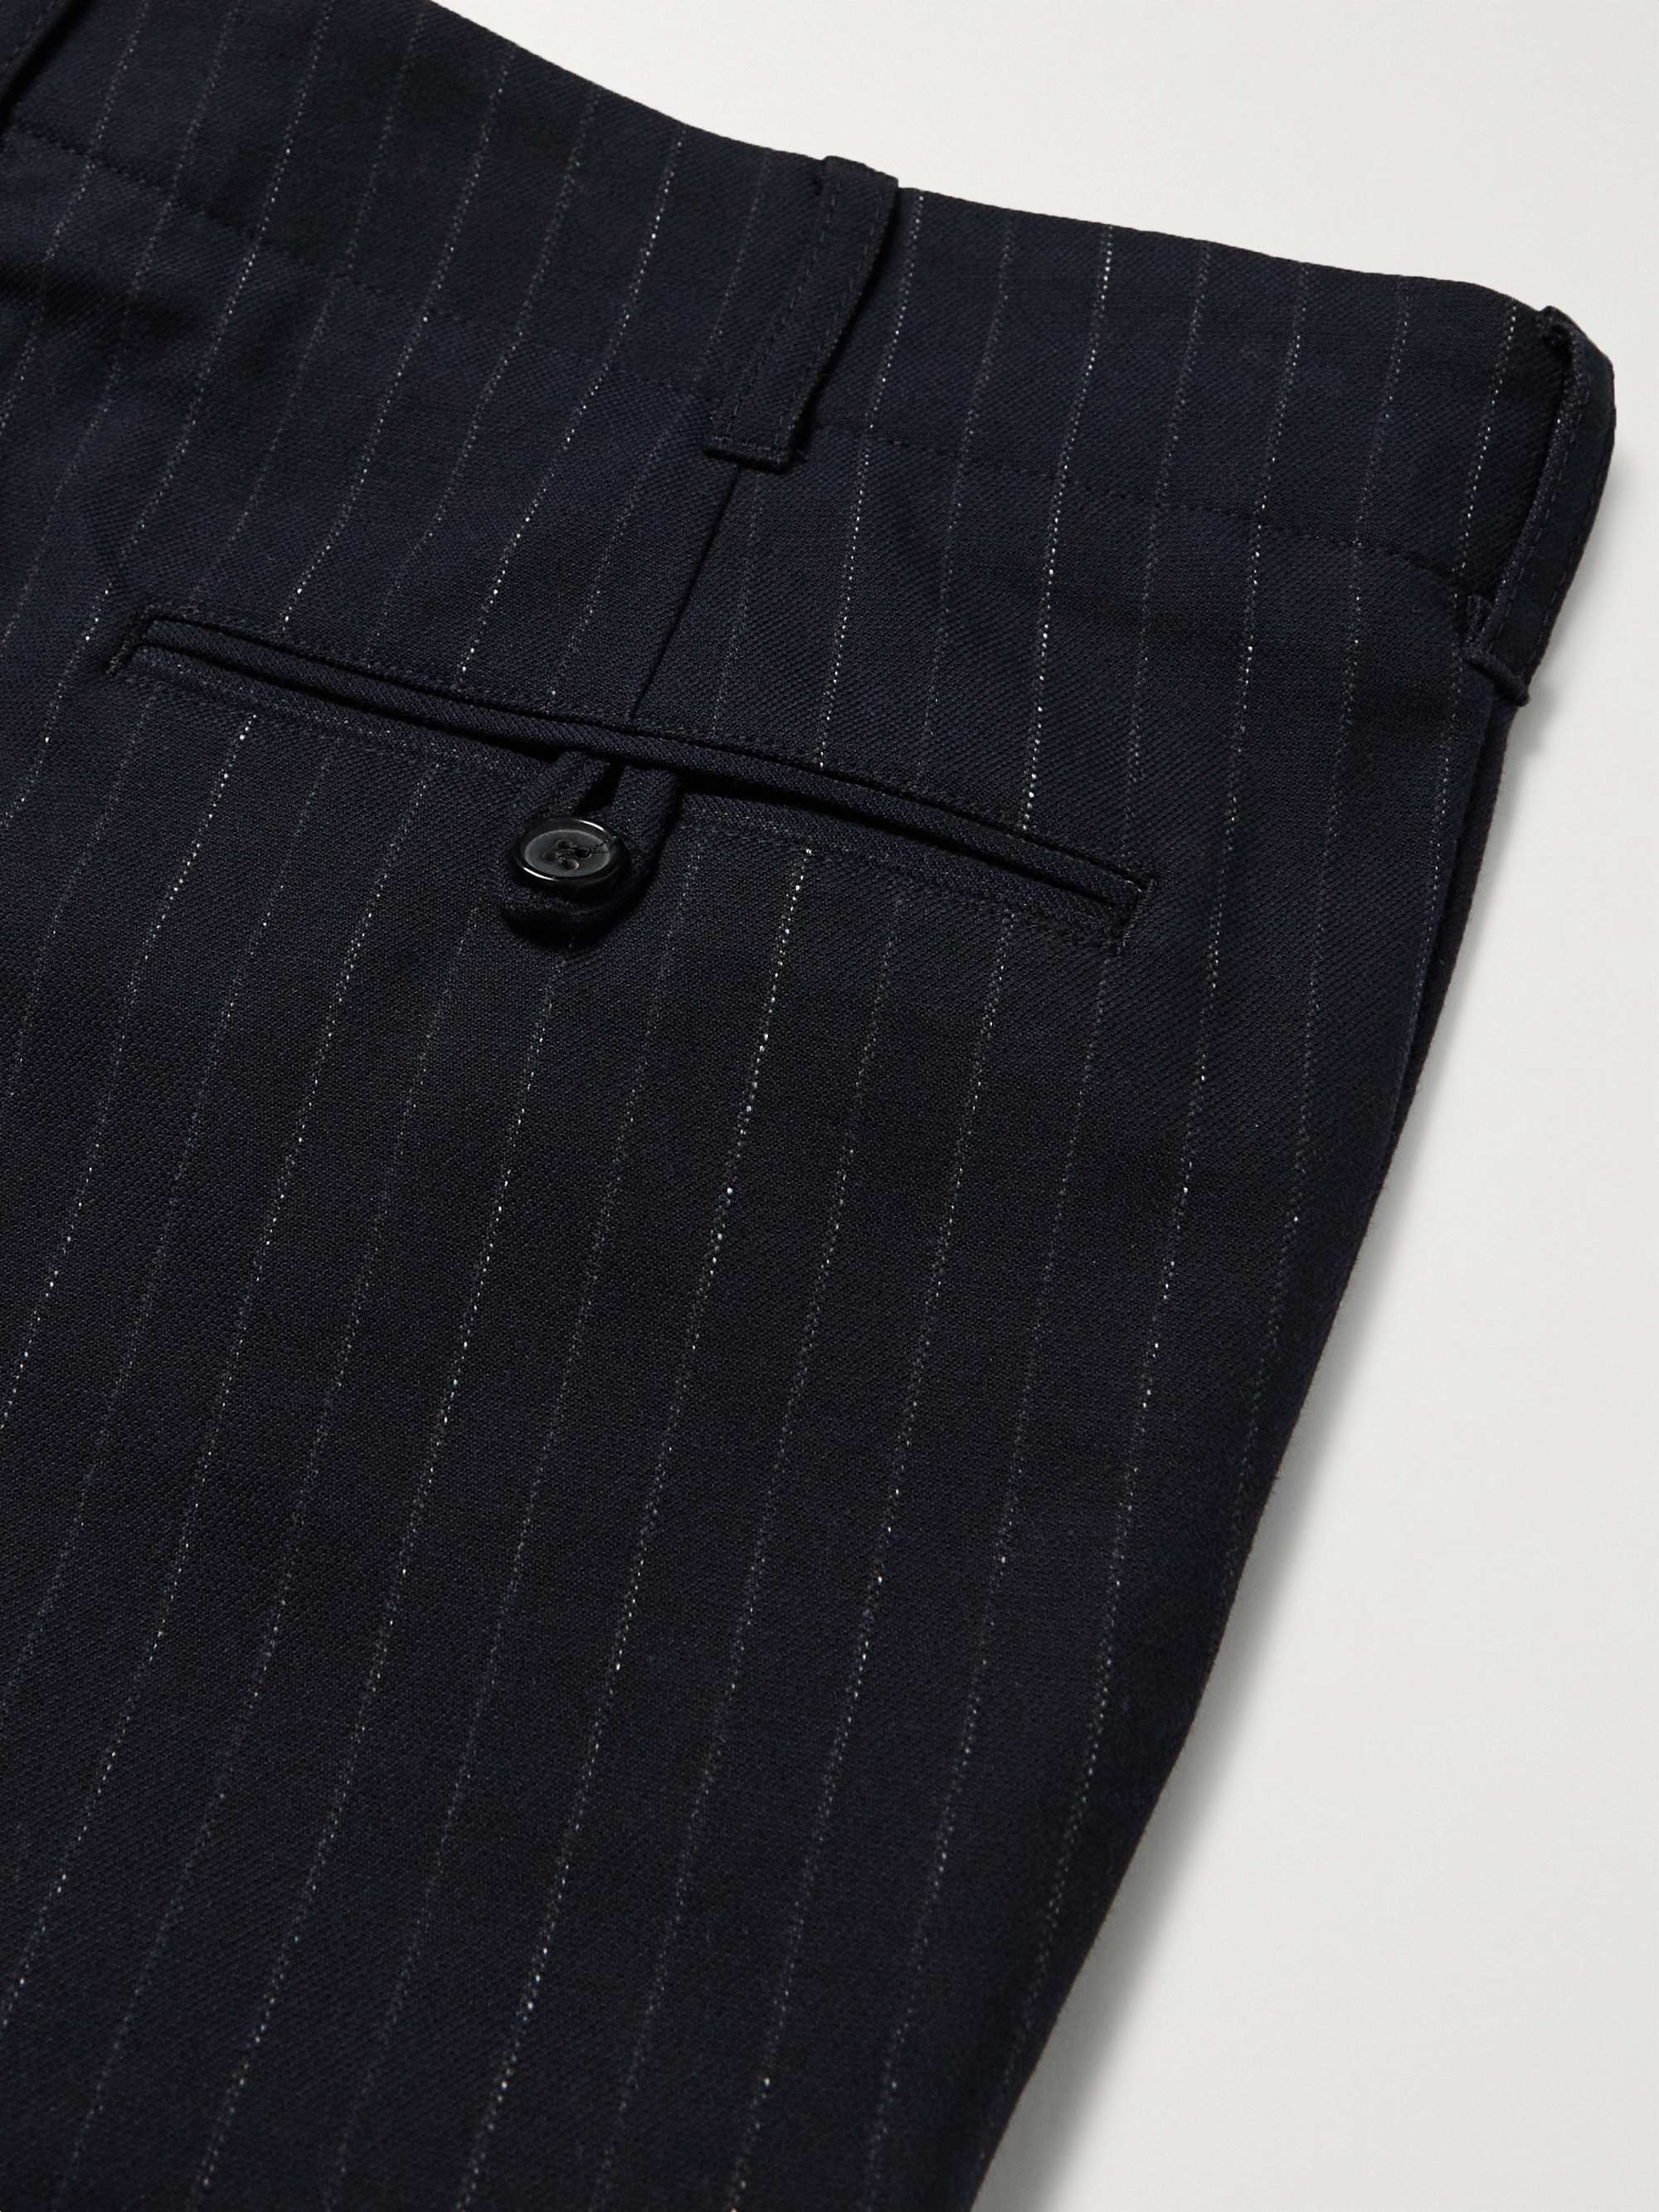 PAUL SMITH Slim-Fit Pinstriped Cotton-Blend Trousers